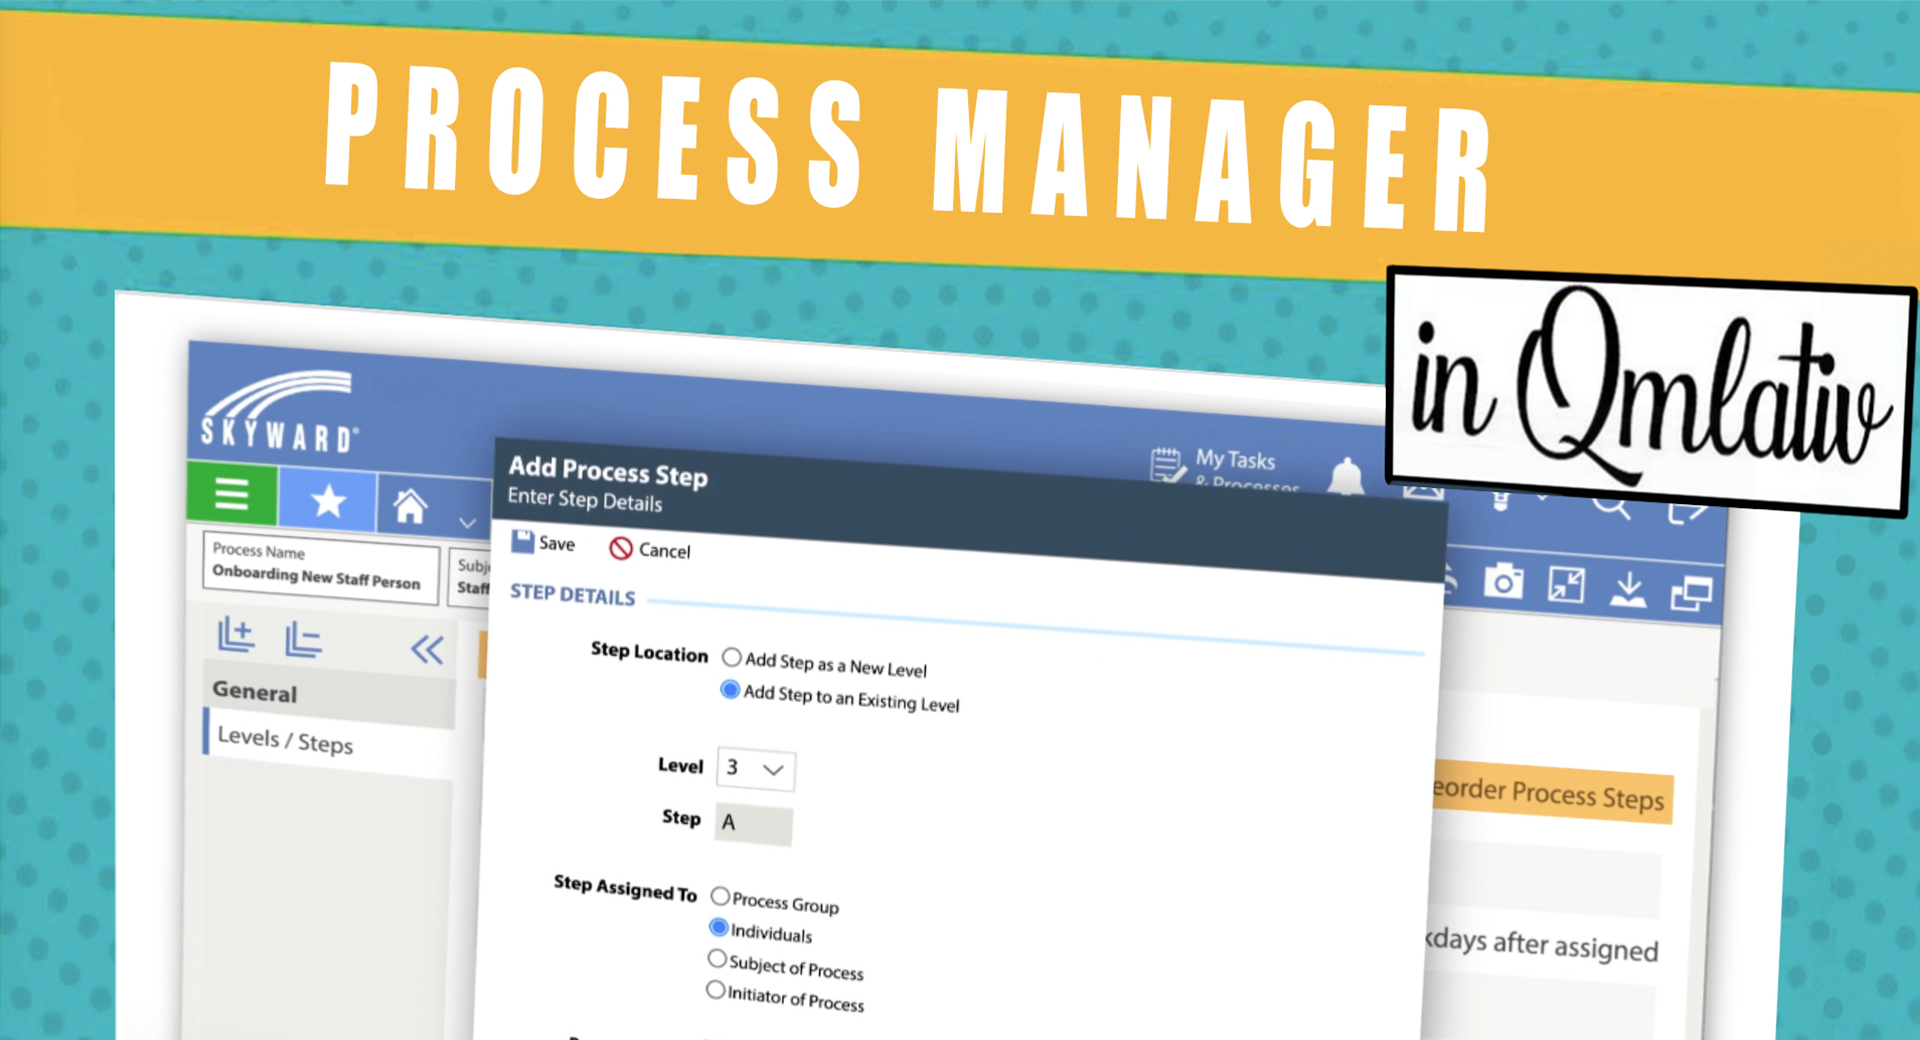 Streamline Workflows with Process Manager